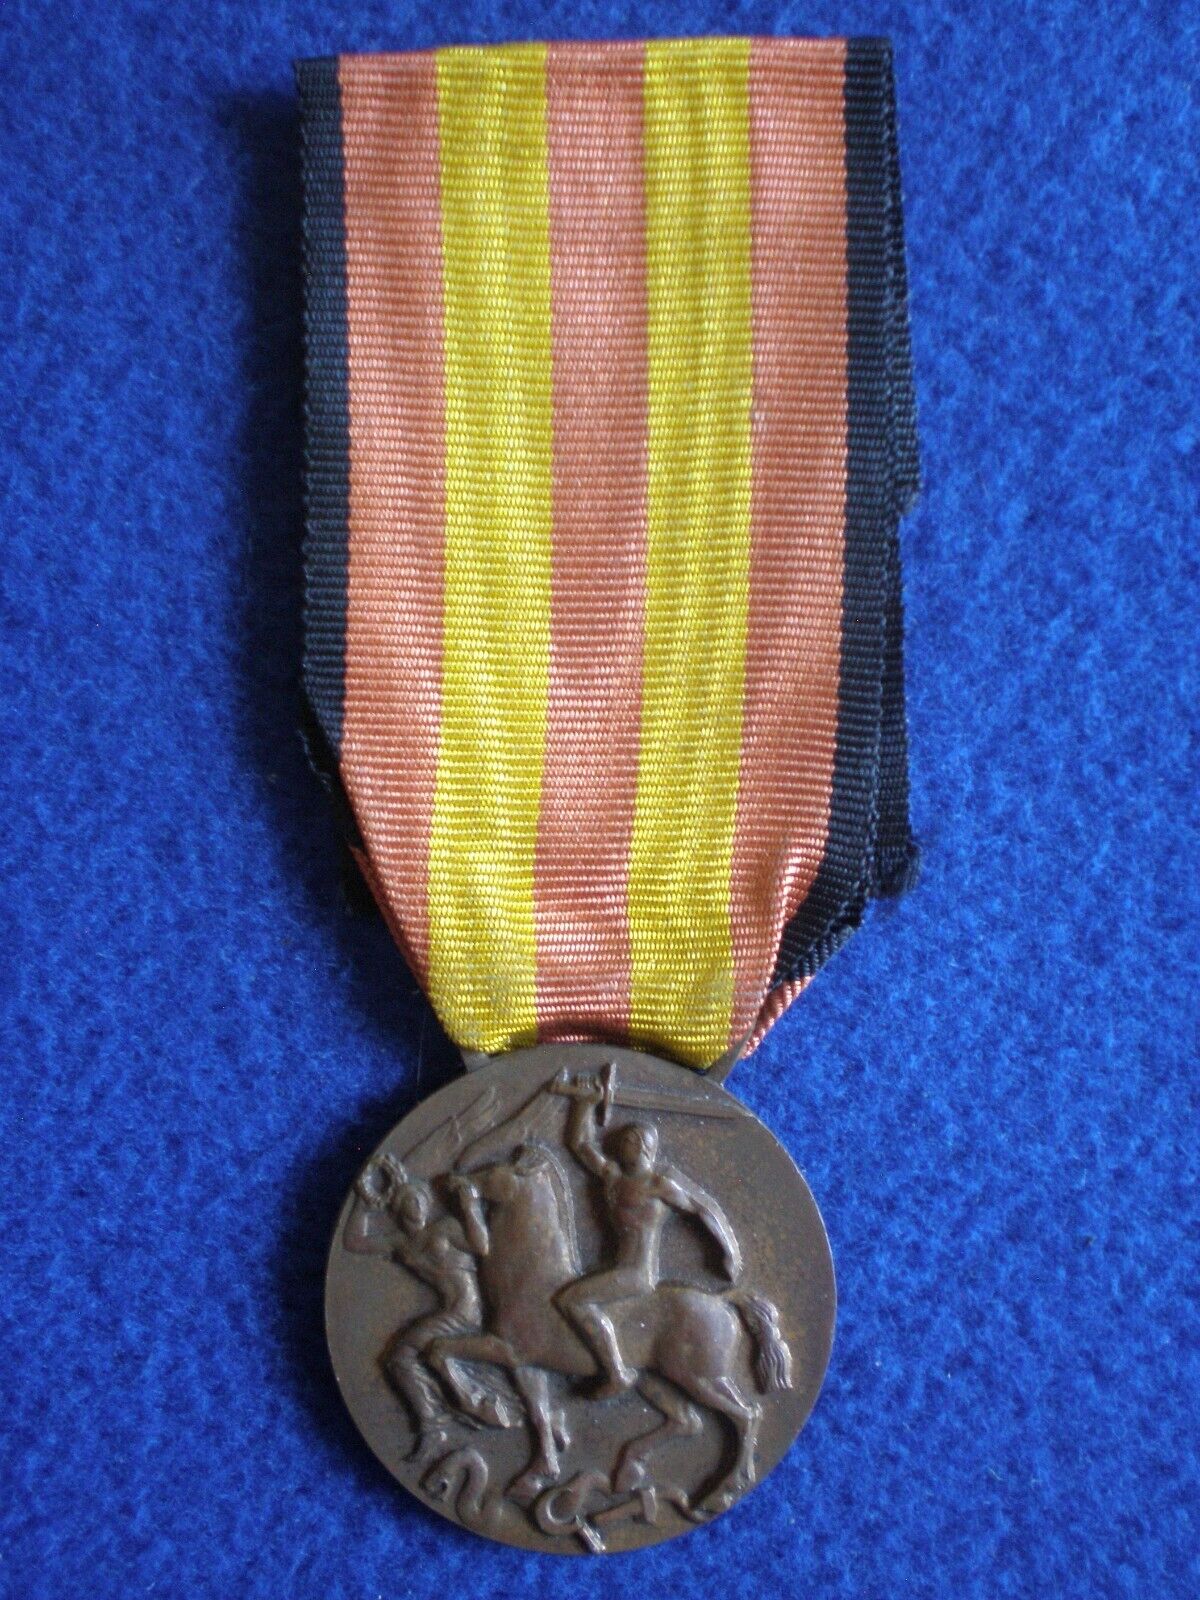 Italy: Commemorative Medal for the Spanish Campaign 1936